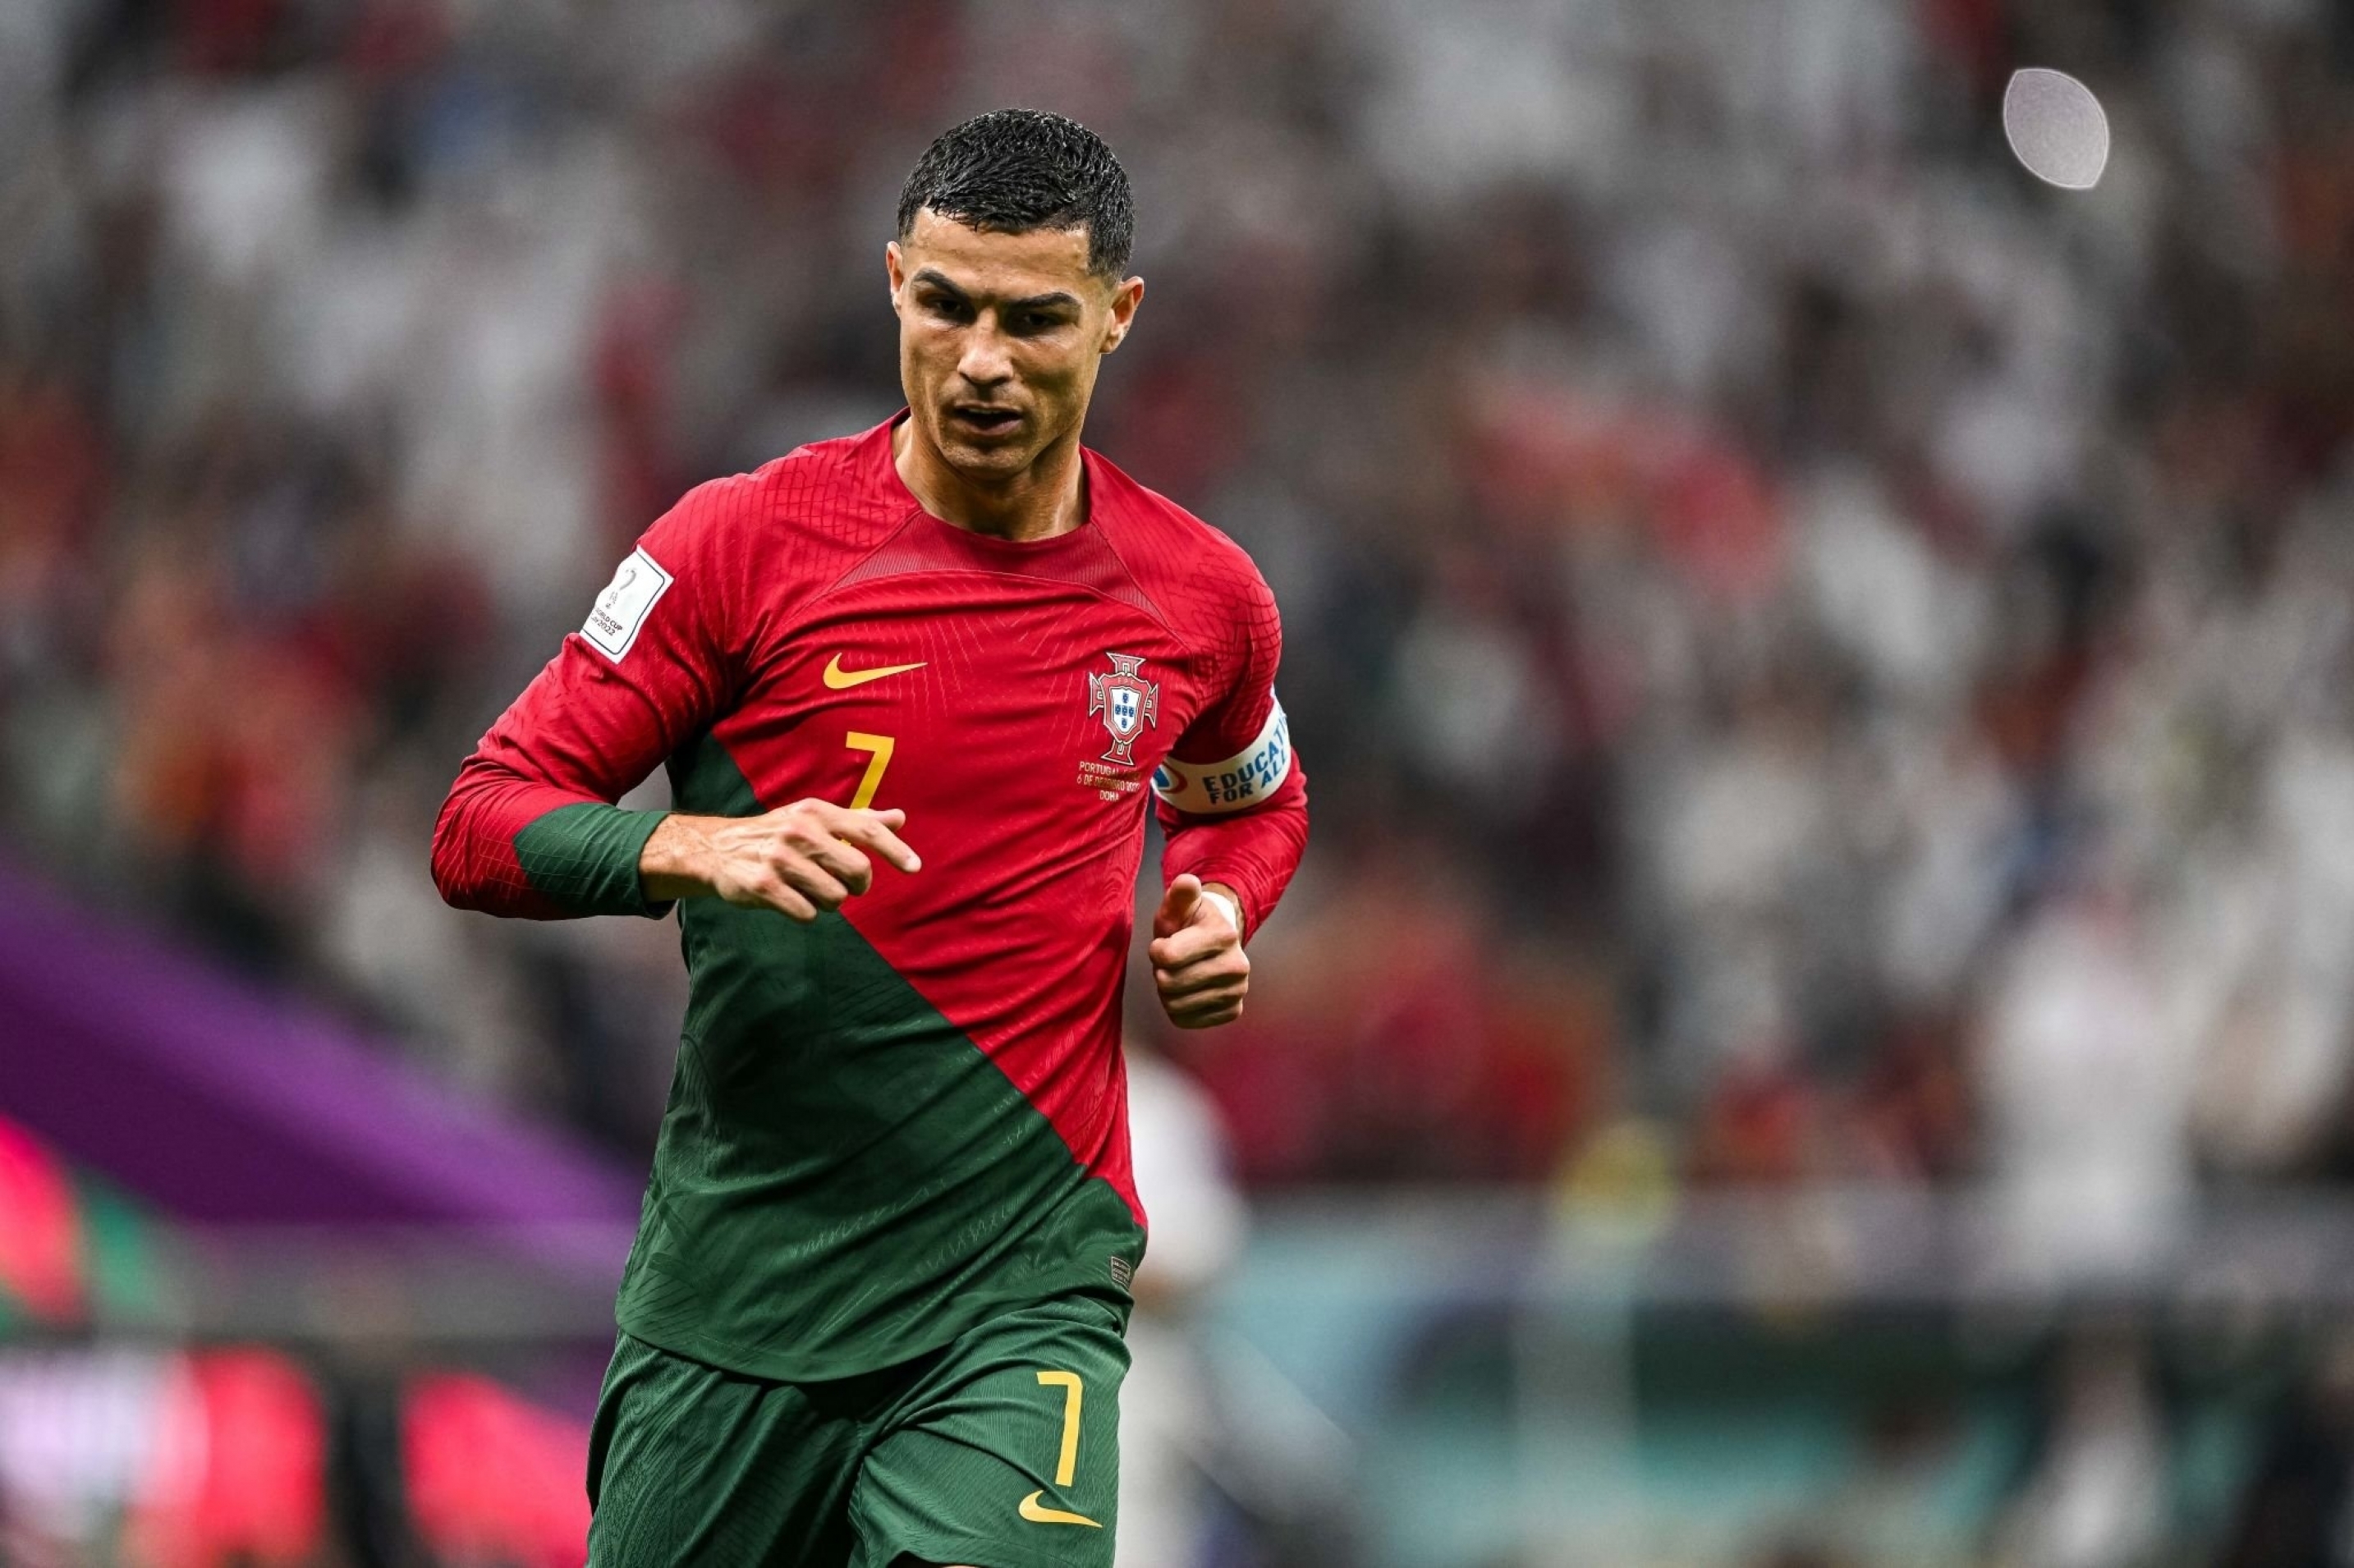 Cristiano Ronaldo Transfer: Ronaldo SET to sign MAJOR Seven-year Deal with  Al-Nassr, Portuguese Superstar to earn £175million every year - Check Out